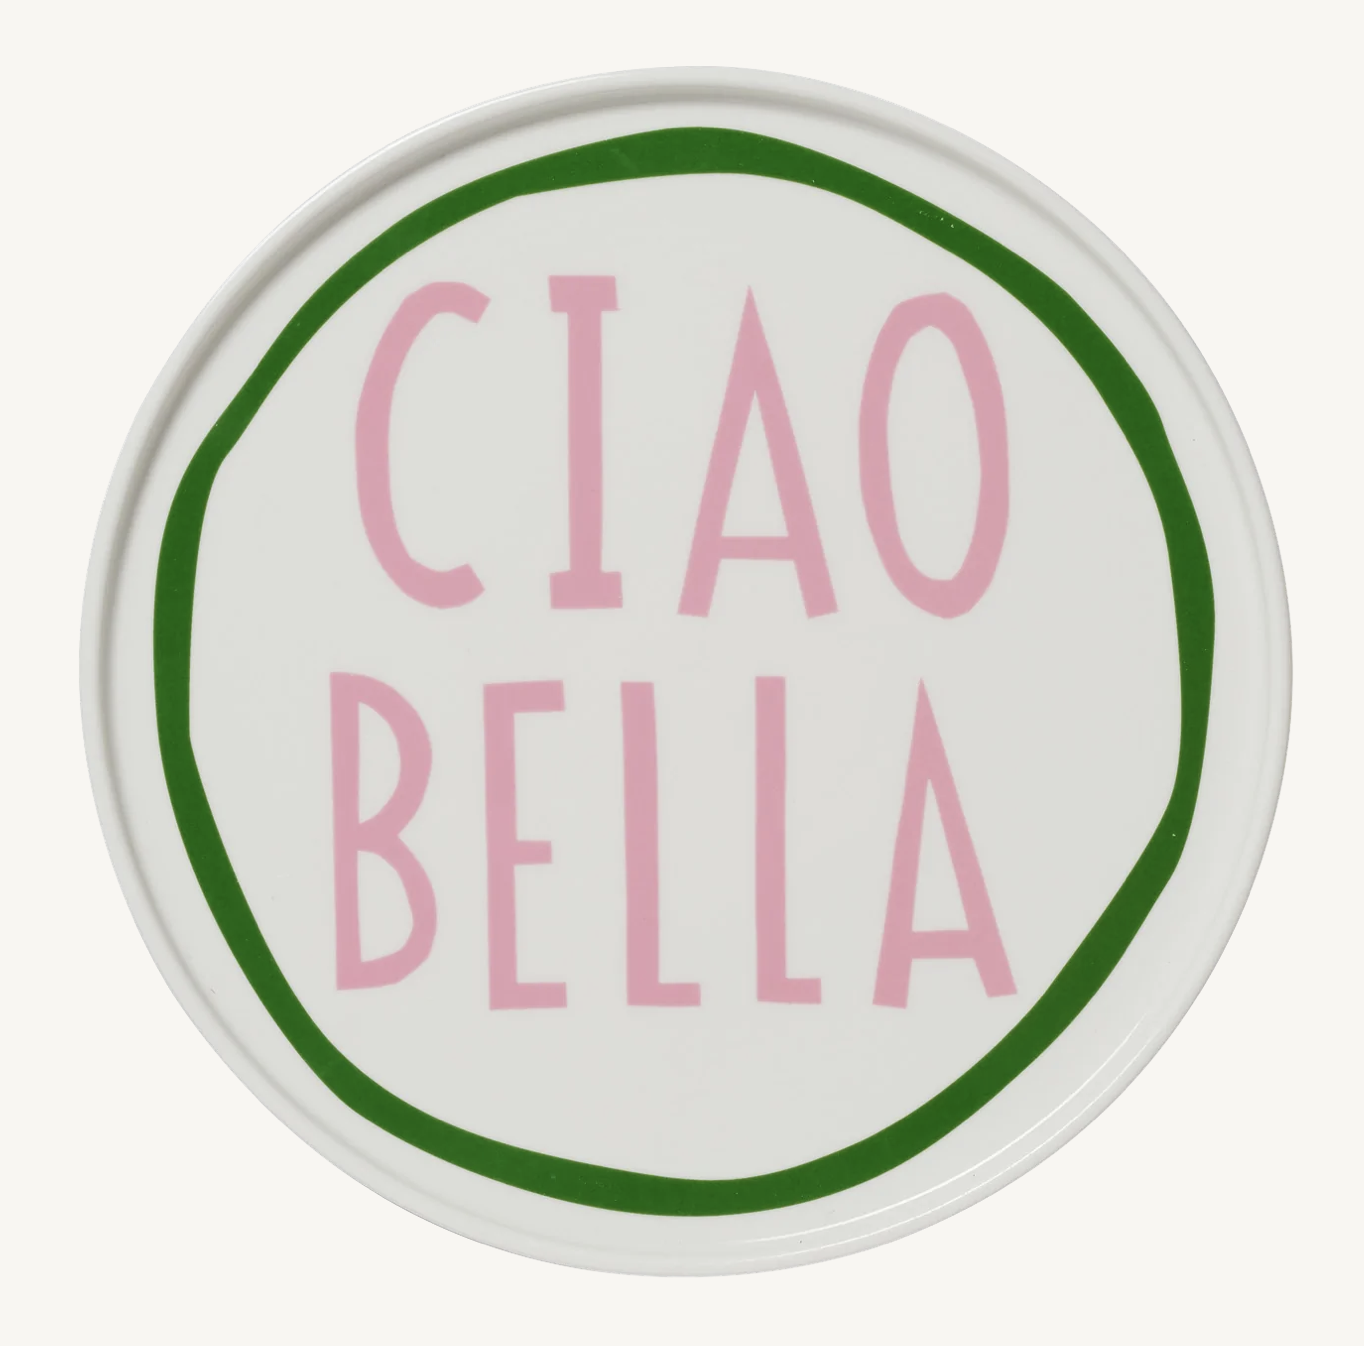 x2 In The Roundhouse Ciao Bella Plate